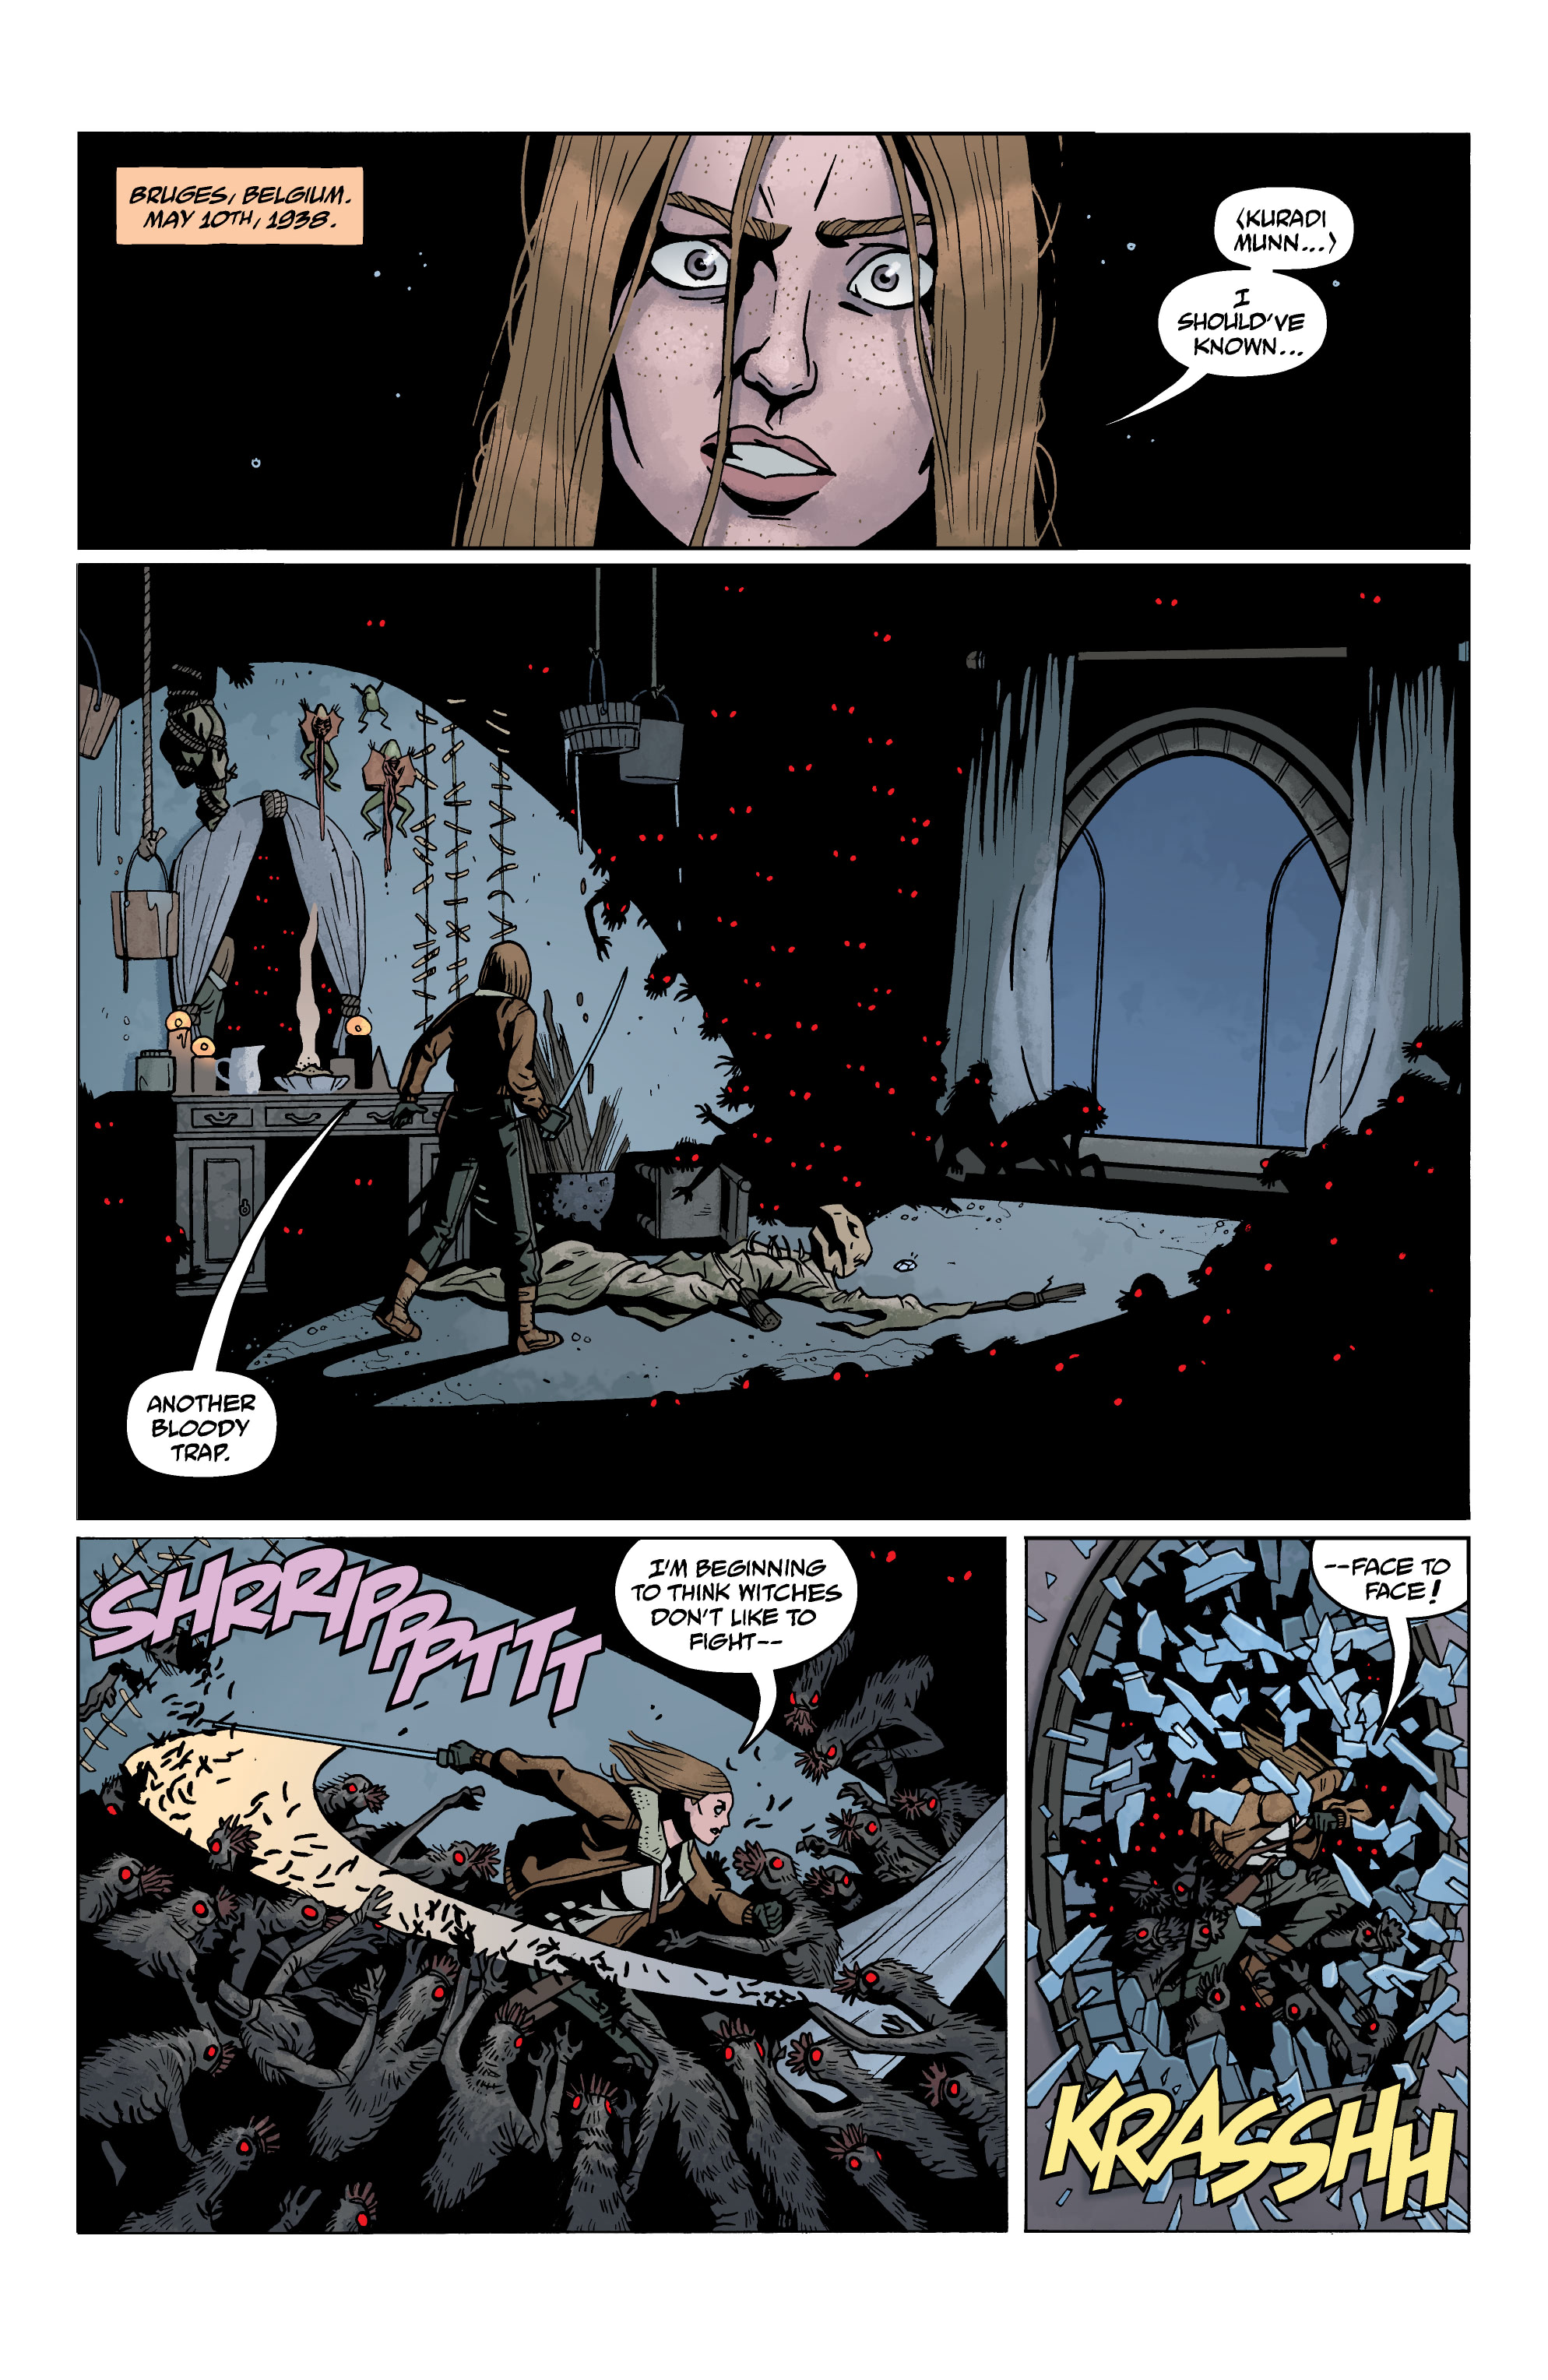 Lady Baltimore: The Witch Queens (2021-): Chapter 1.1 - Page 3